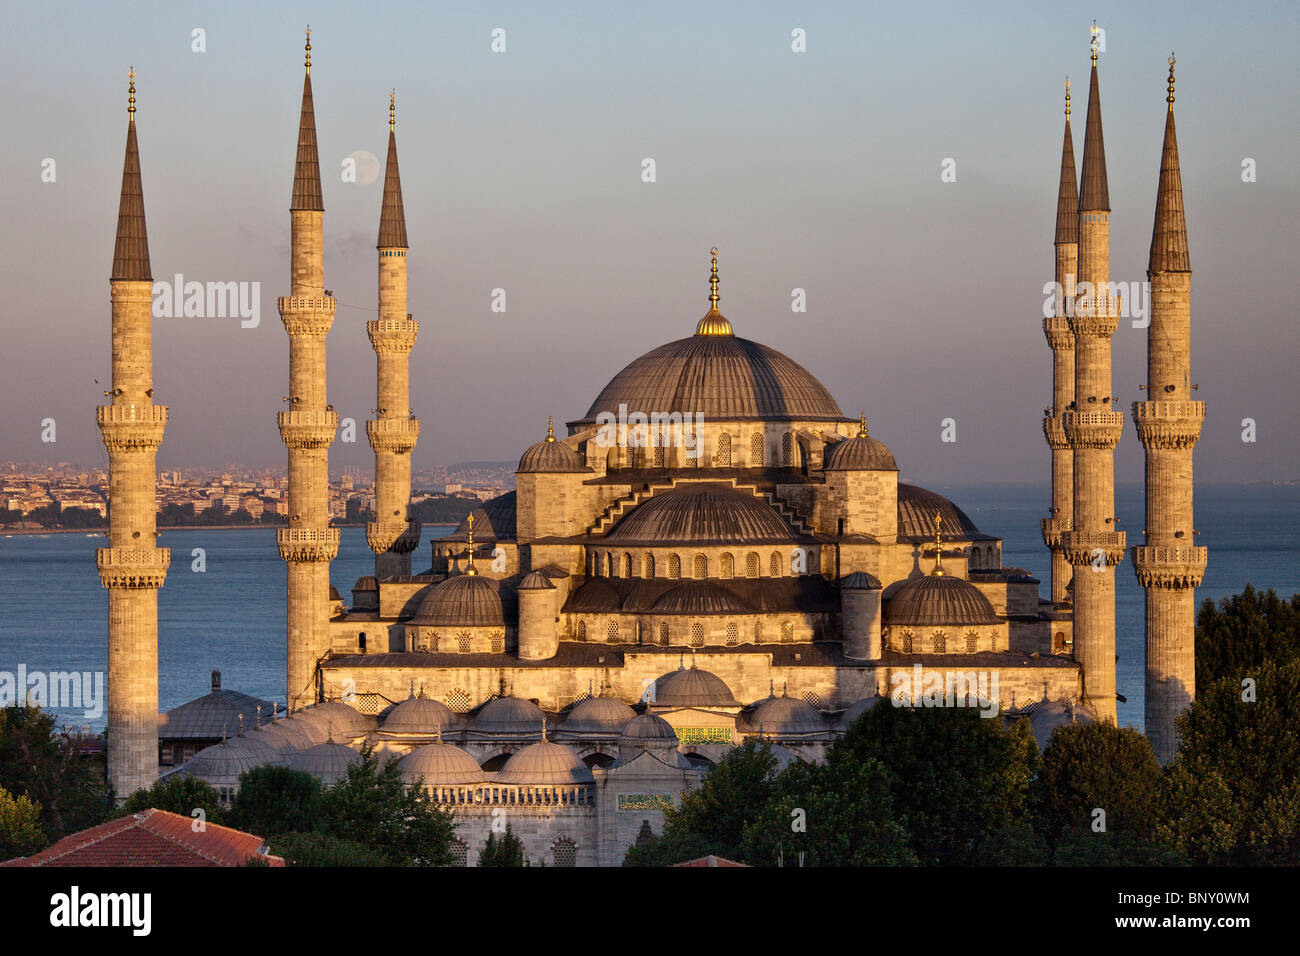 Sultan Ahmed or the Blue Mosque in Istatnbul, Turkey Stock Photo